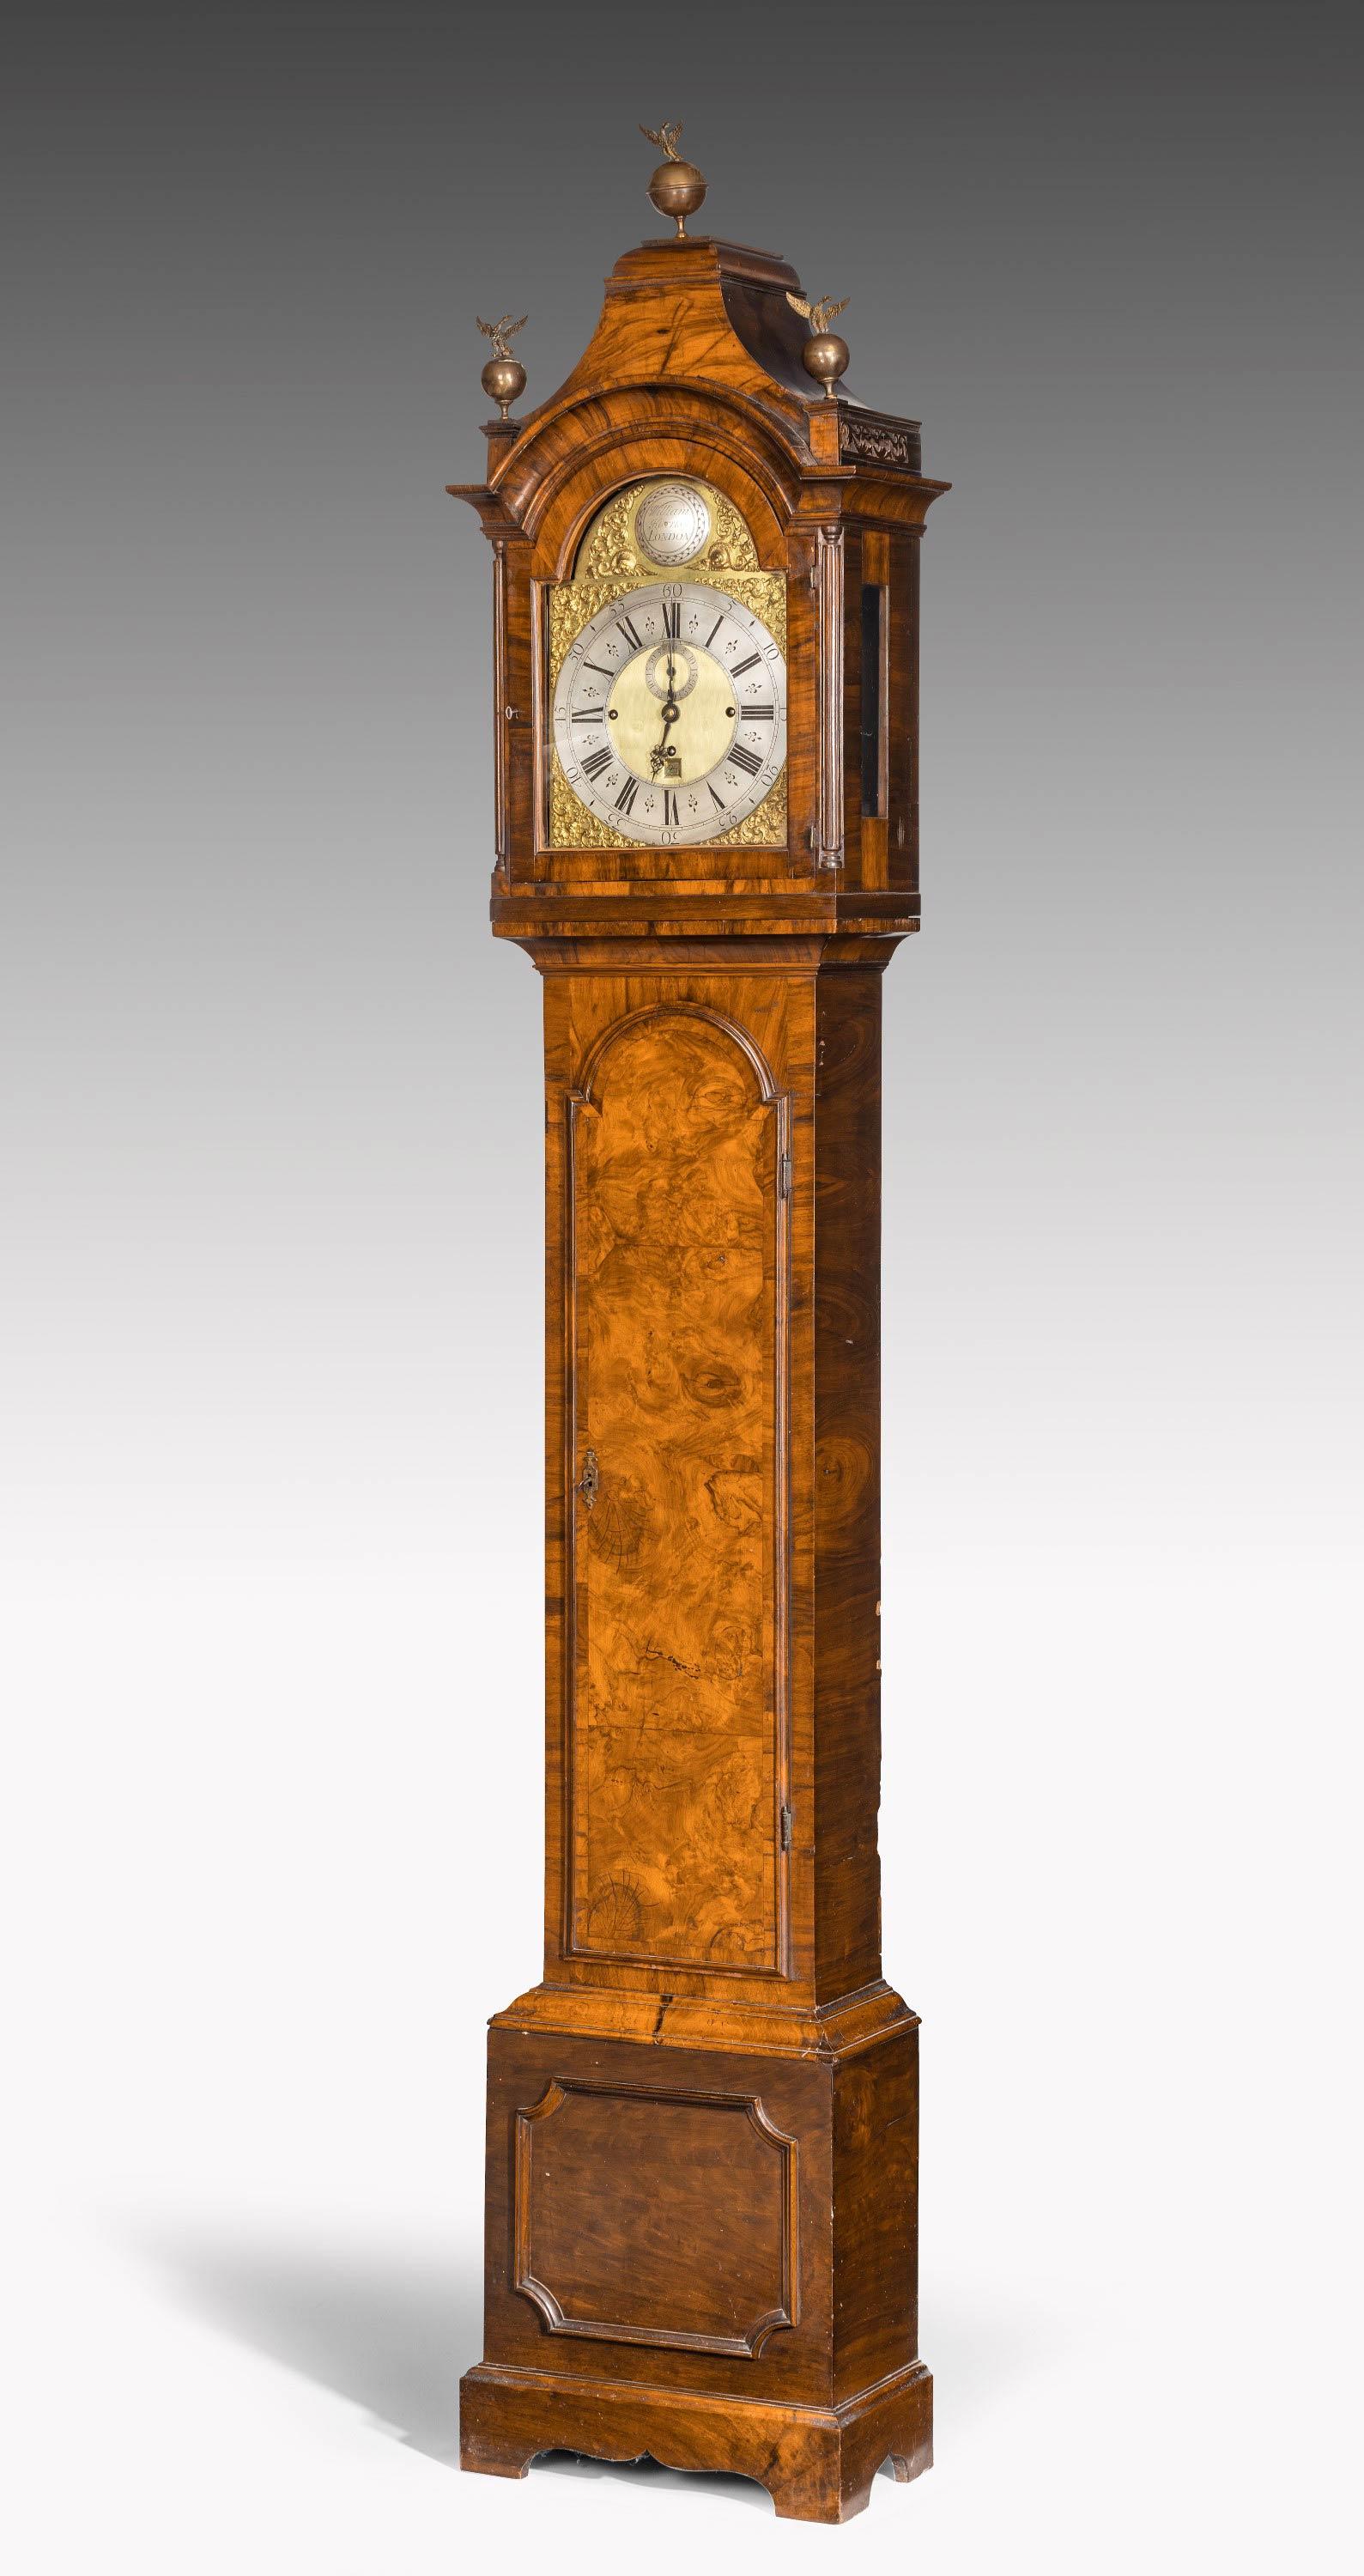 An unusual longcase clock in a fine but very retrained walnut frame and a hooded top. The name William Harris engraved on the plate. Harris was active in the second and third quarters of the 18th century in London.  The whole of the mechanism has